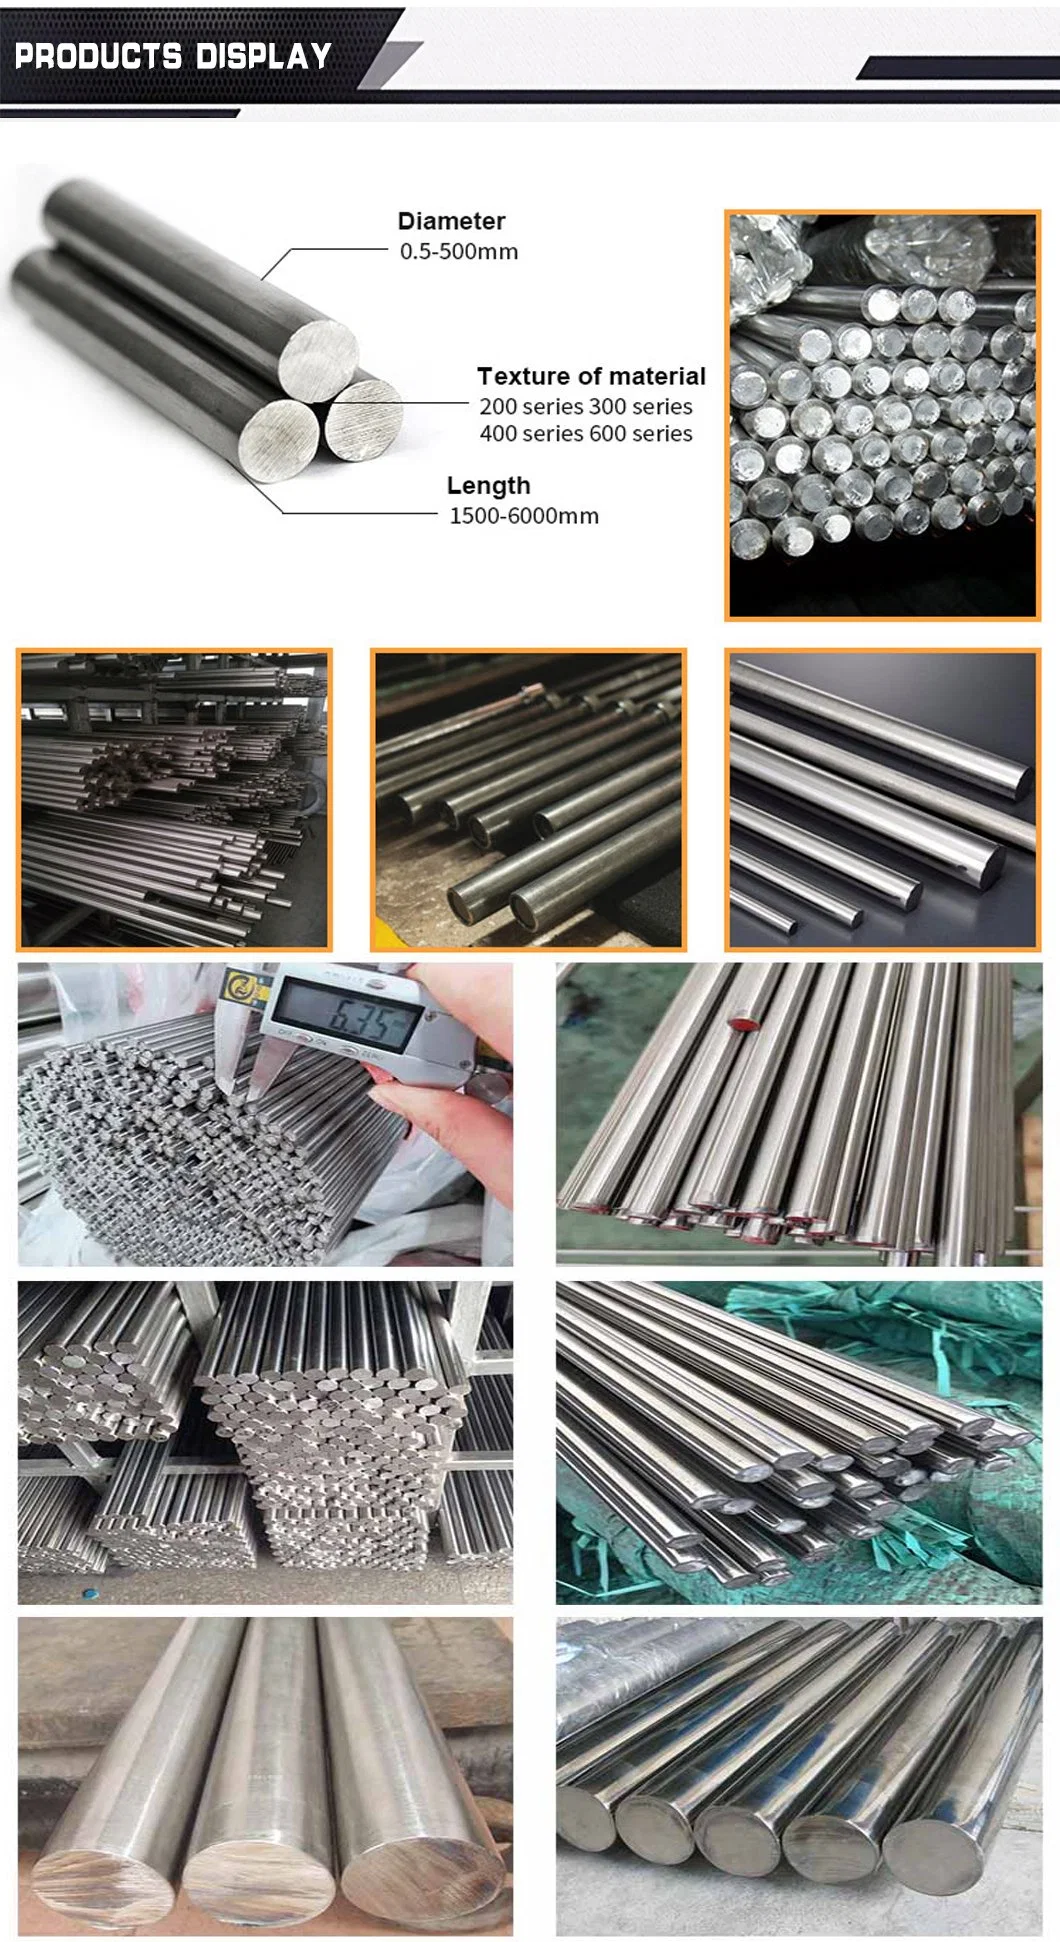 Hot Sell Dia 3mm 6mm 10mm 20mm 1.4302 Stainless Steel Rod AISI 304 316 Round Steel Bar Price Per Ton